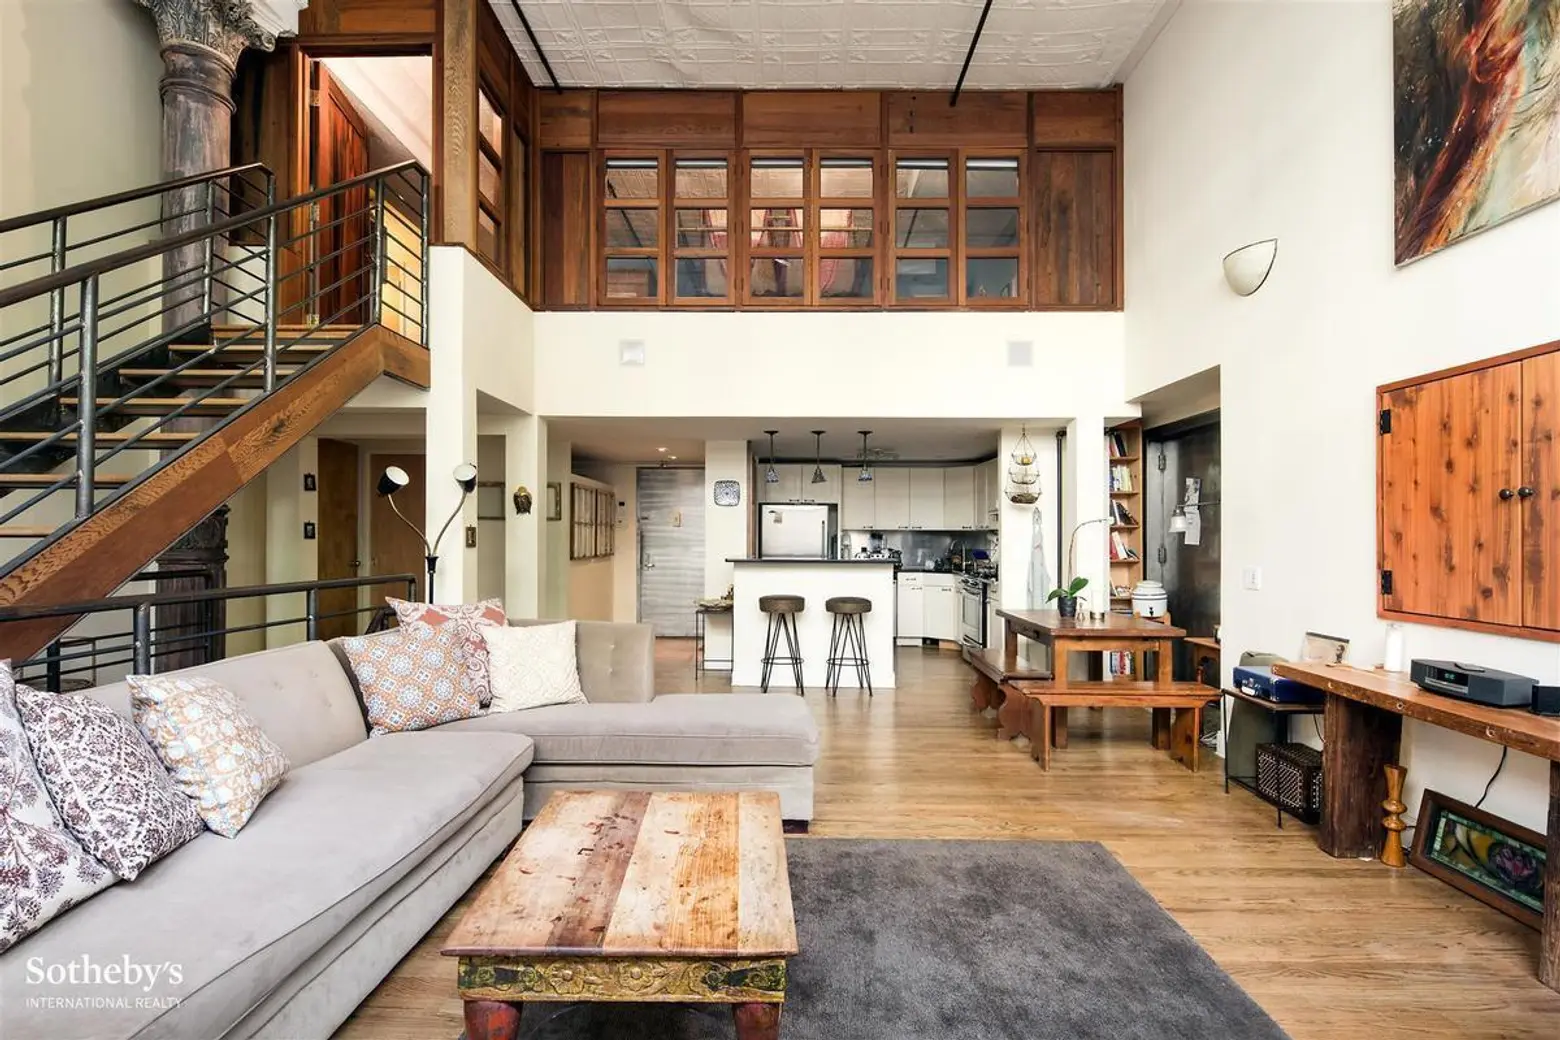 $2.3M Williamsburg triplex is clad in cedar from NYC’s iconic water towers